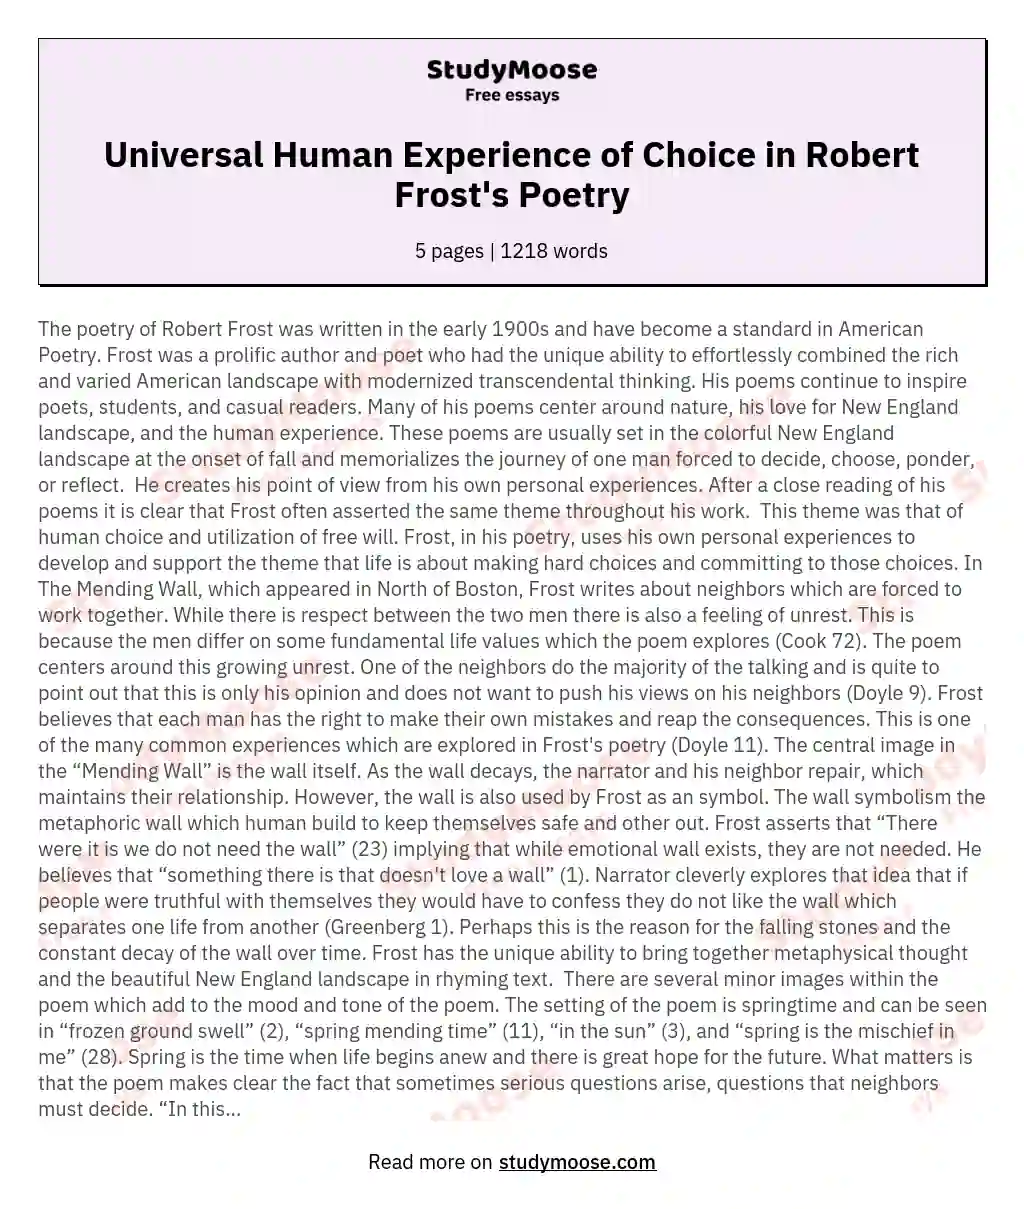 Universal Human Experience of Choice in Robert Frost's Poetry